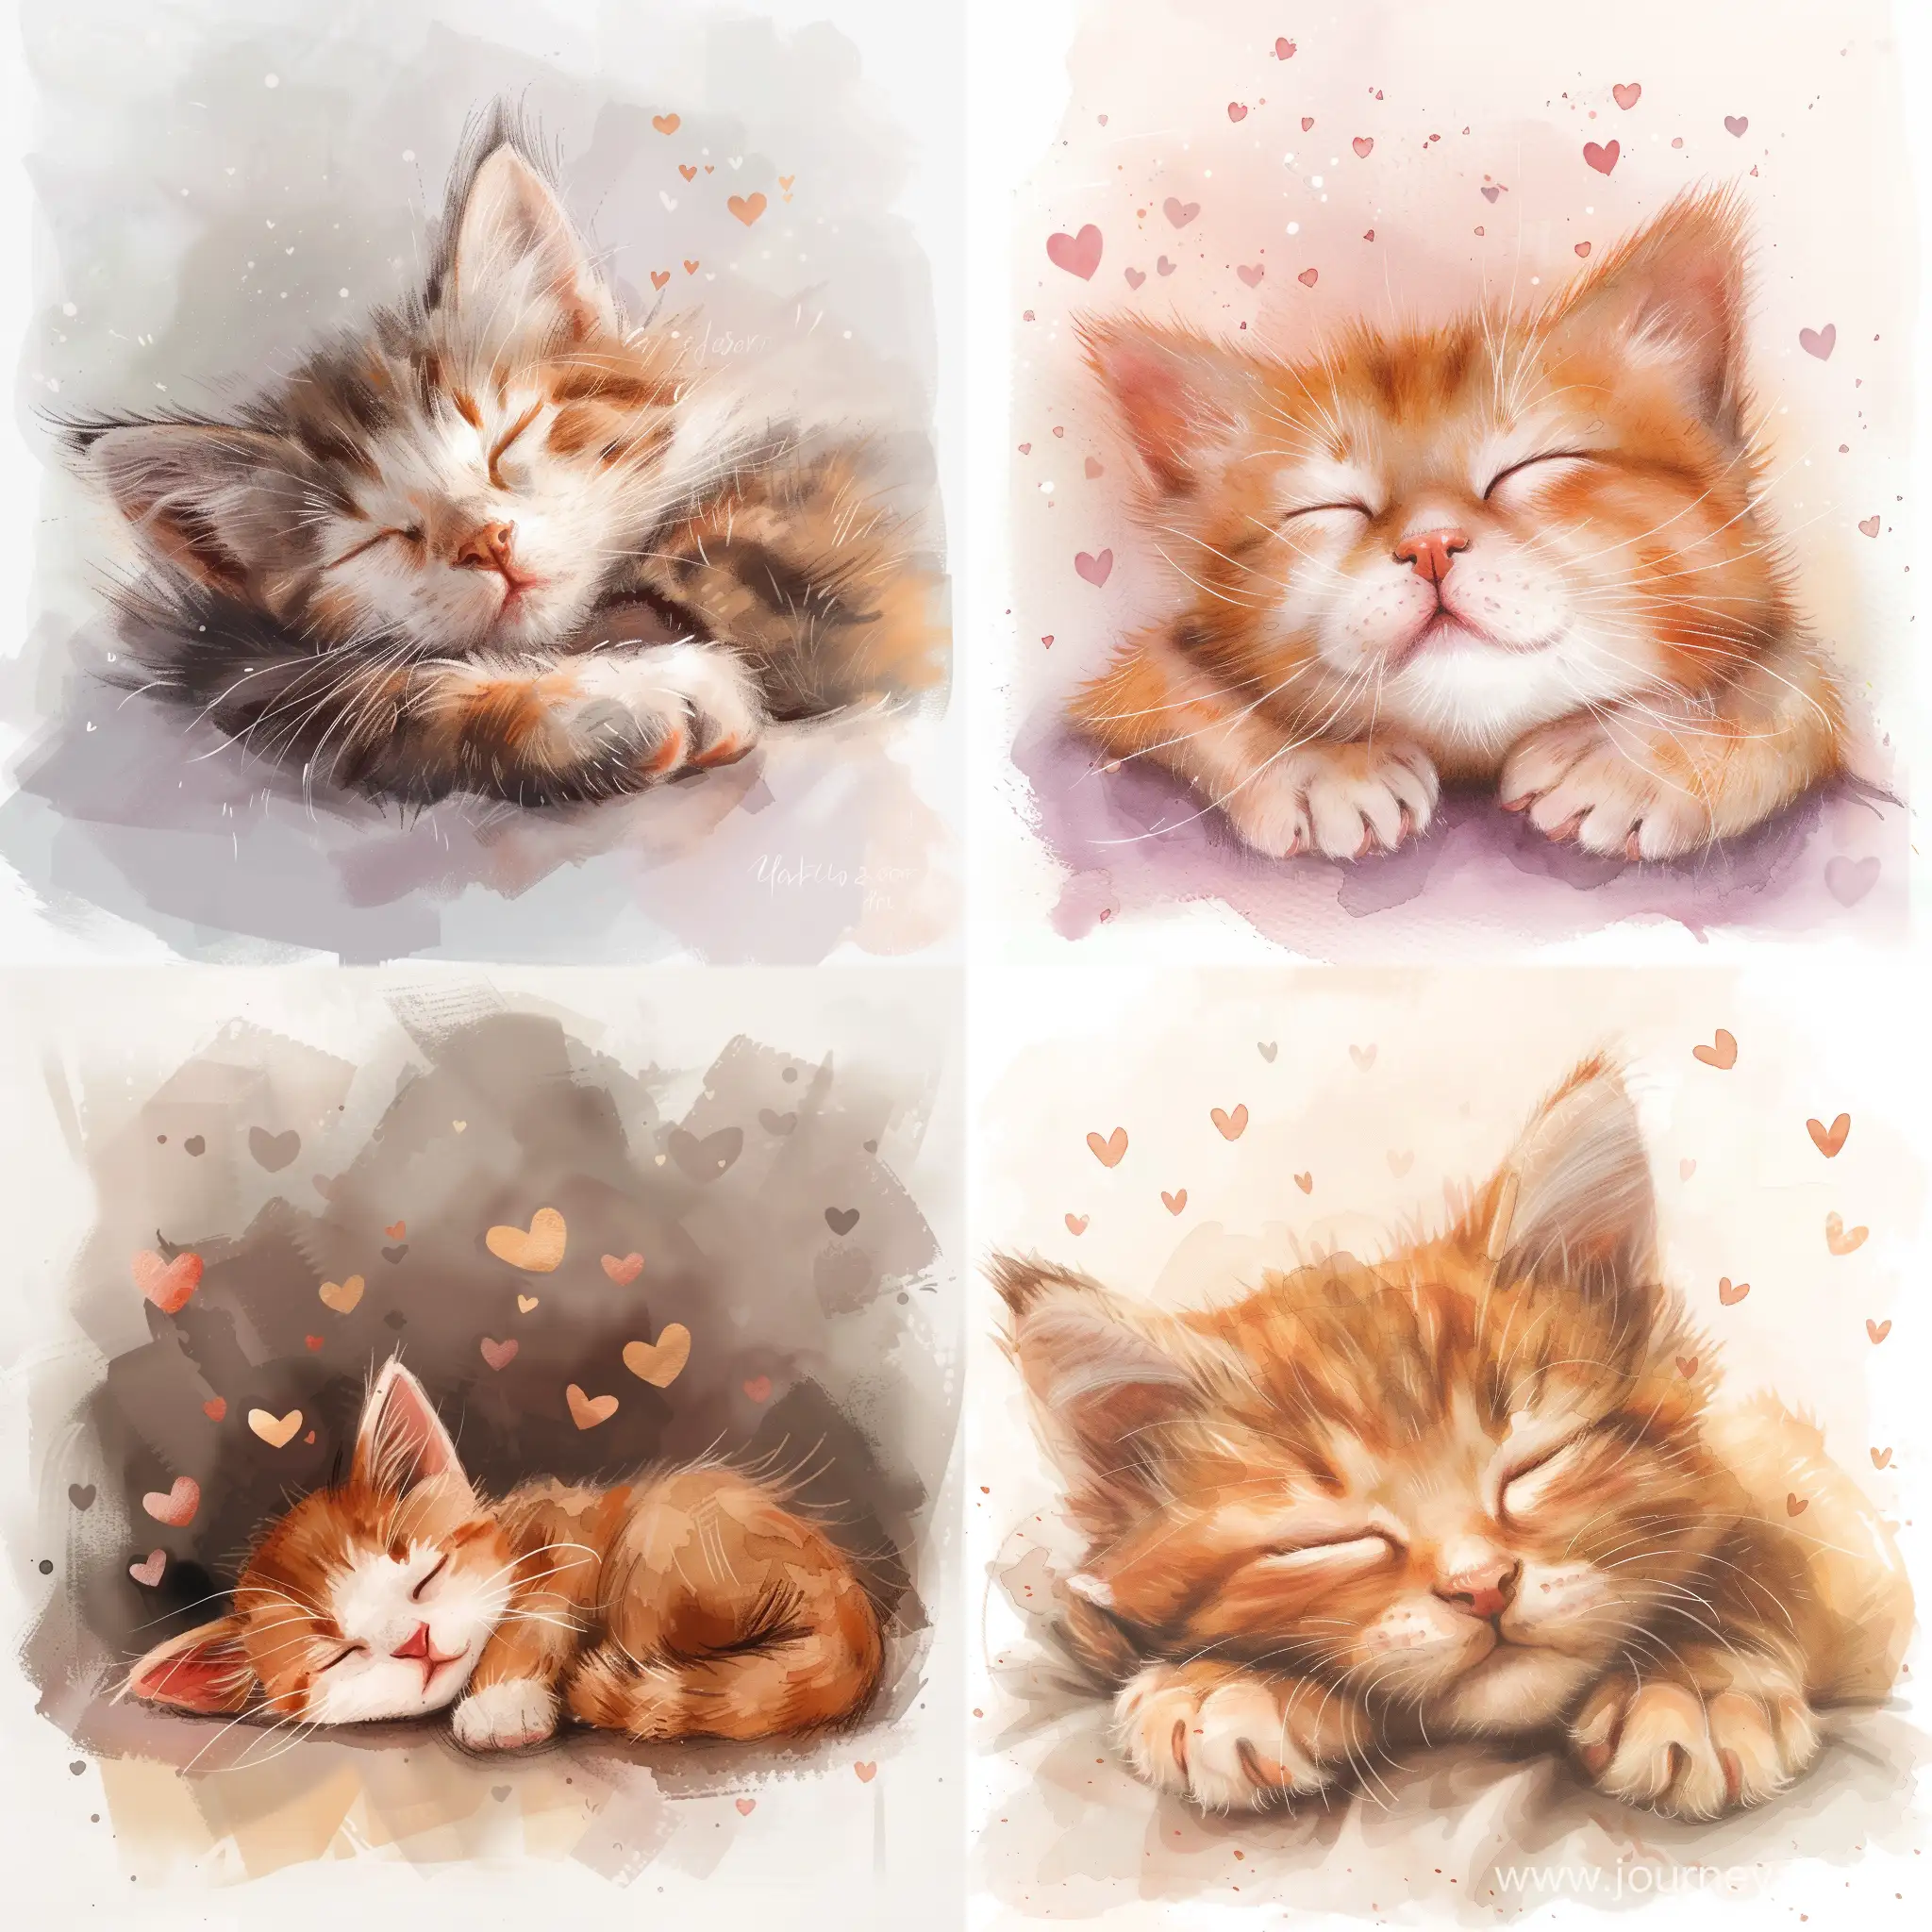 Adorable-Kitten-Falling-Asleep-Surrounded-by-Fluttering-Hearts-in-Watercolor-Style